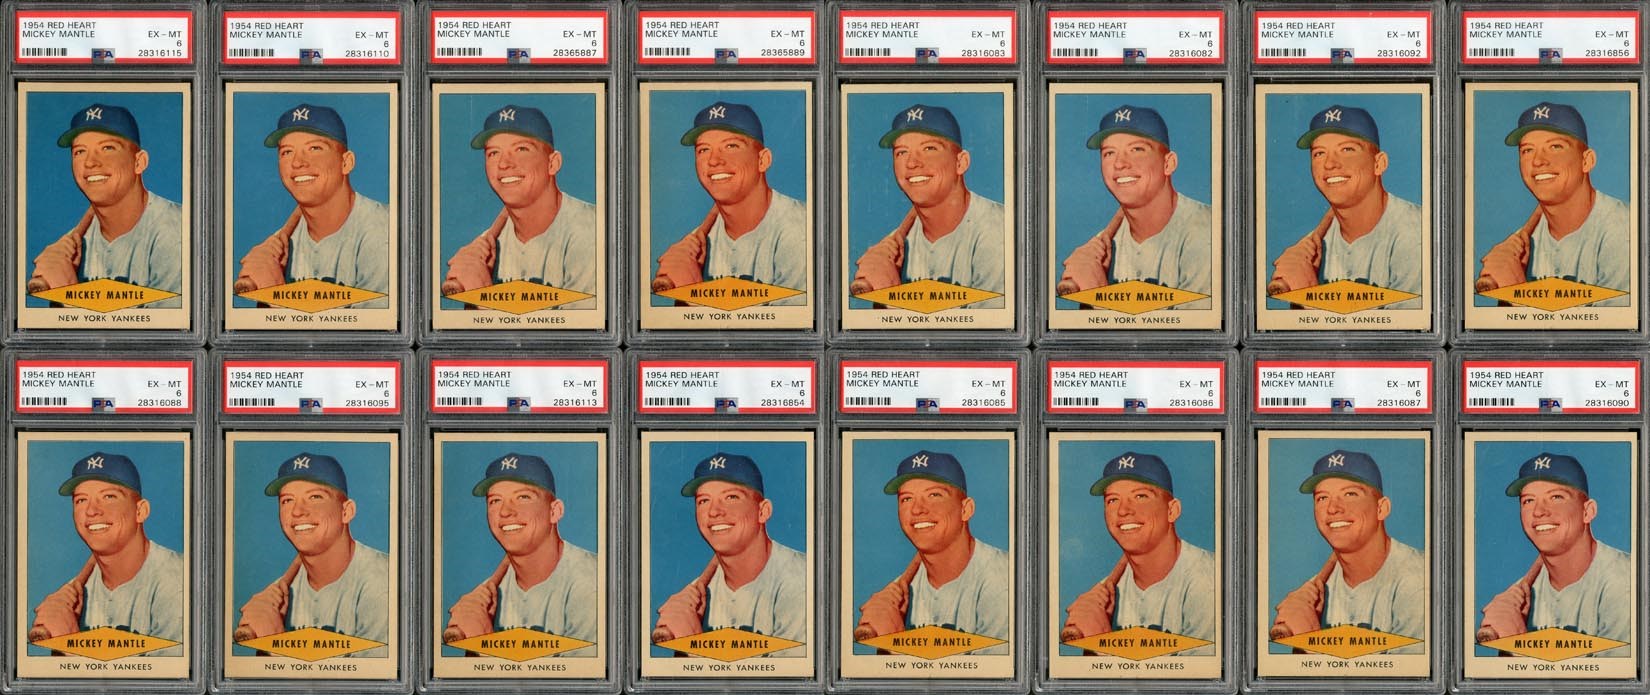 Baseball and Trading Cards - 1954 Red Heart Mickey Mantle PSA Graded Collection of 16 Cards (All PSA EX-MT 6)